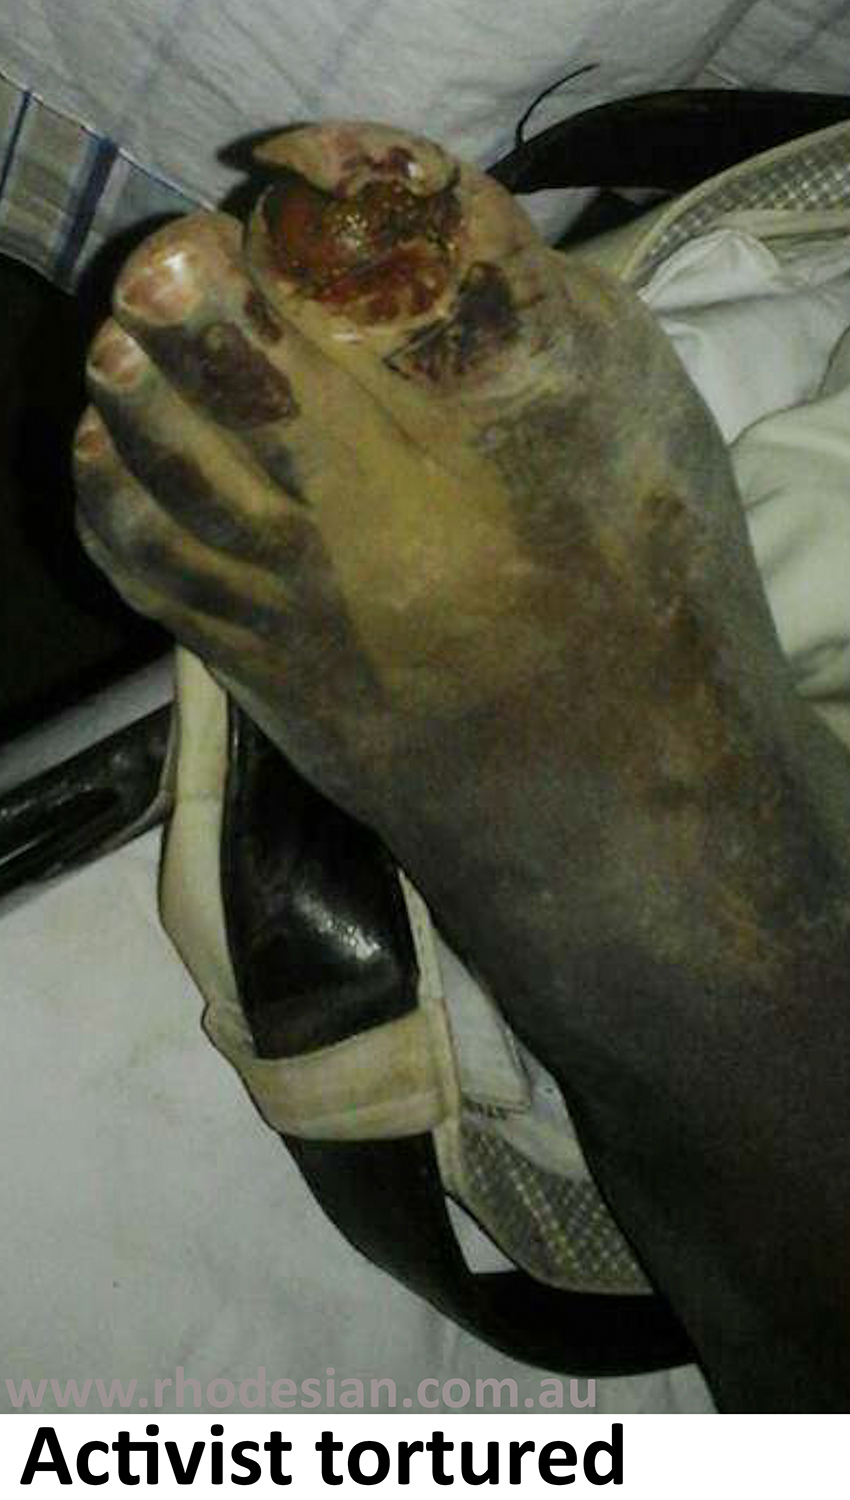 Zimbabwe activist Sylvanos Mudzvova was abducted but relased after torture and removal of big toe nail